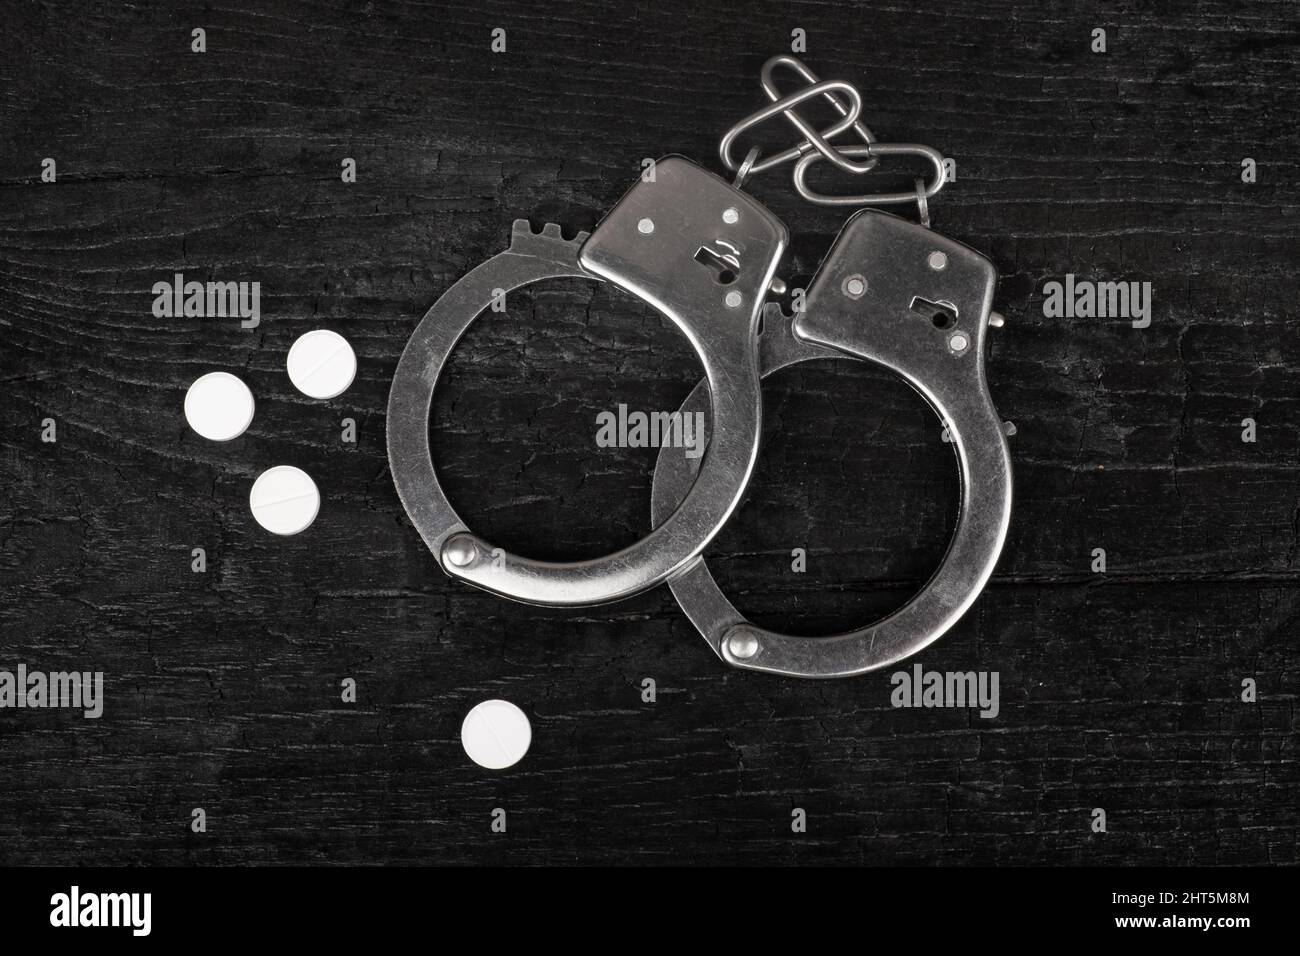 metal handcuffs on a black background with white narcotic pills. Stock Photo